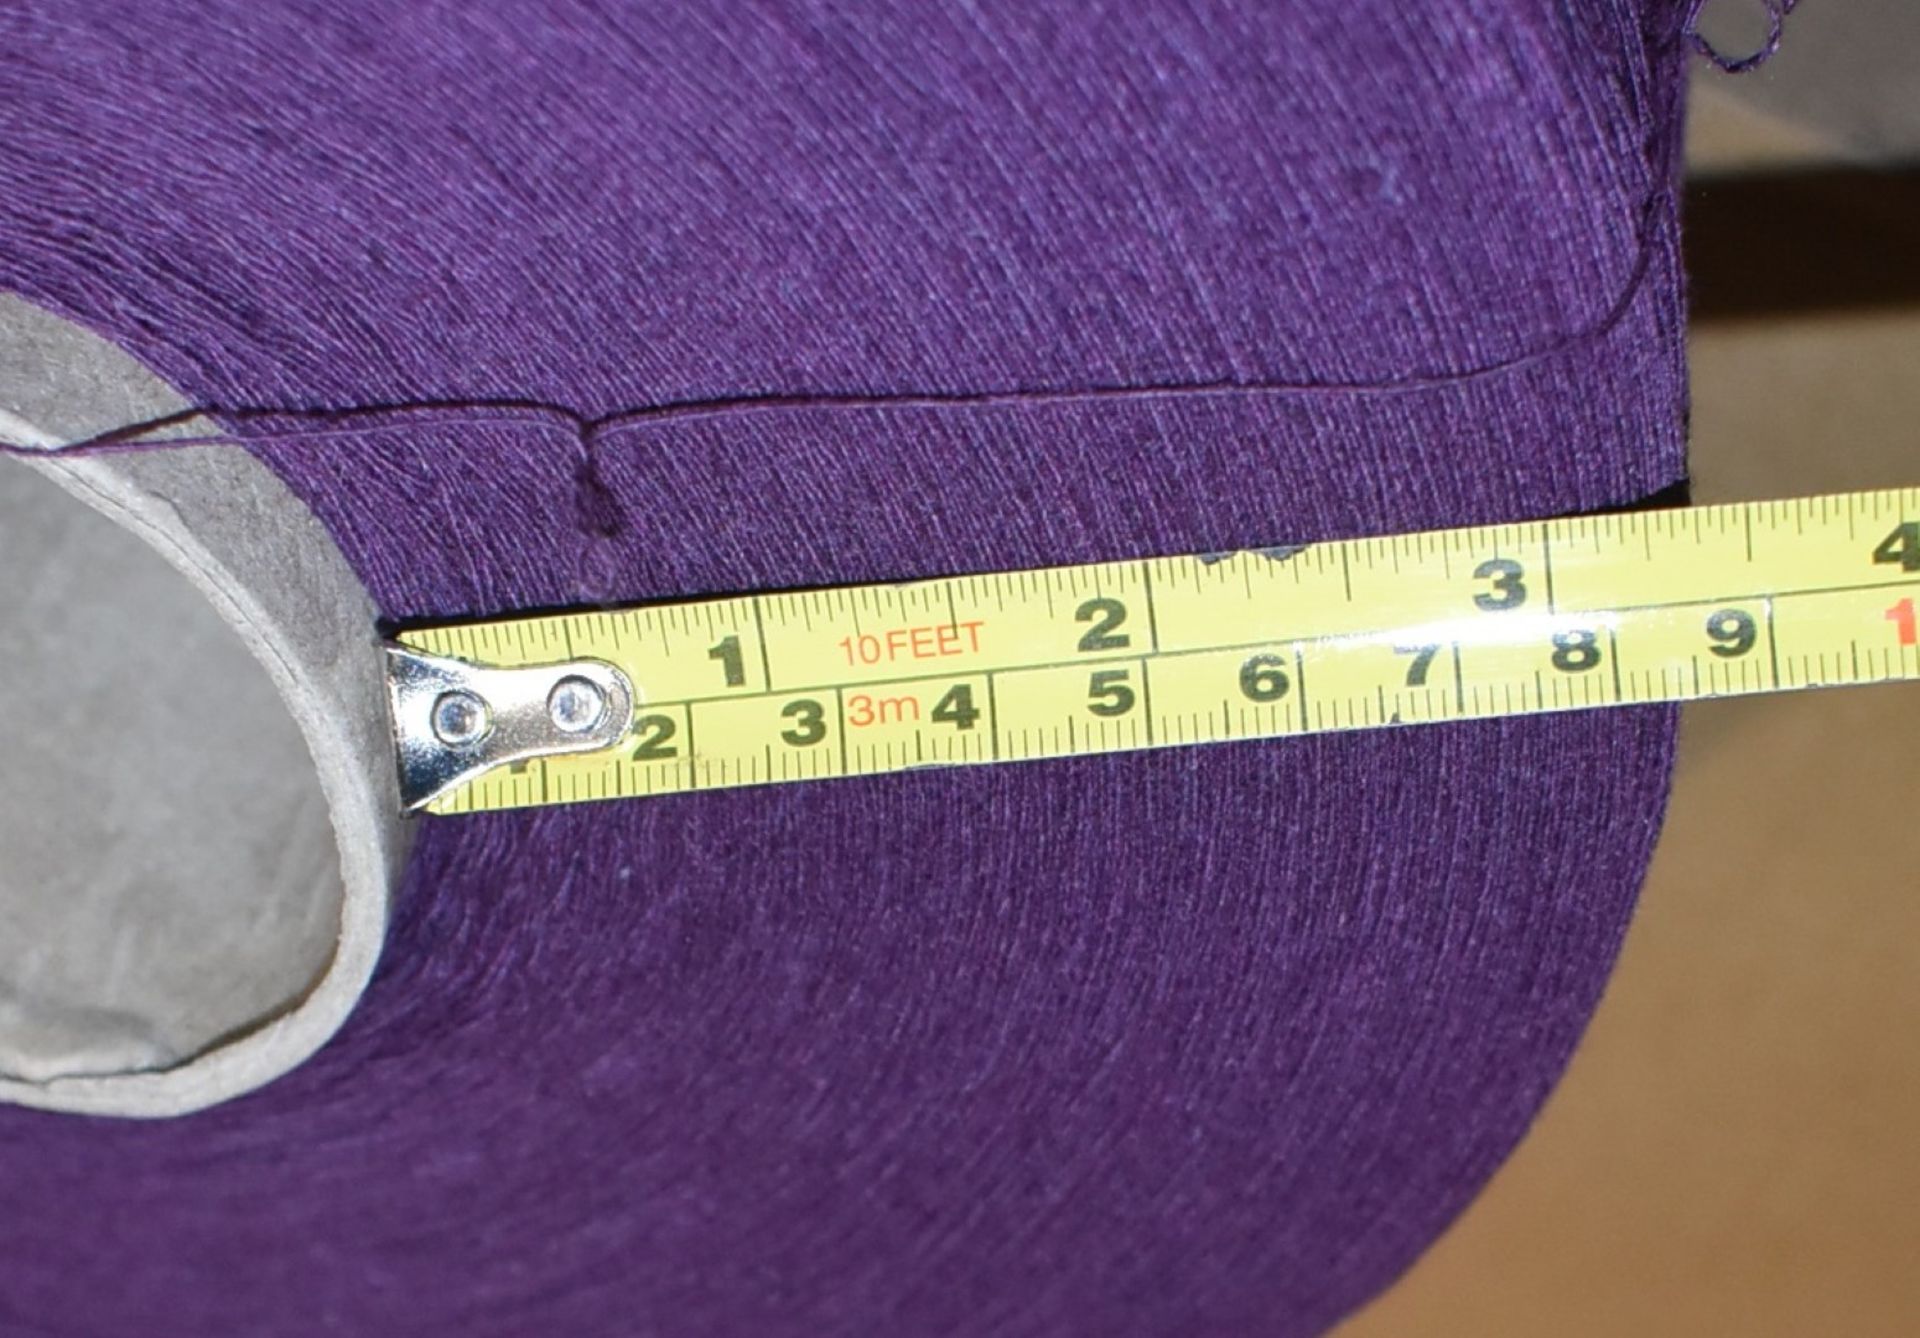 6 x Cones of 1/13 MicroCotton Knitting Yarn - Colour: Purple - Approx Weight: 2,300g - New Stock - Image 9 of 9